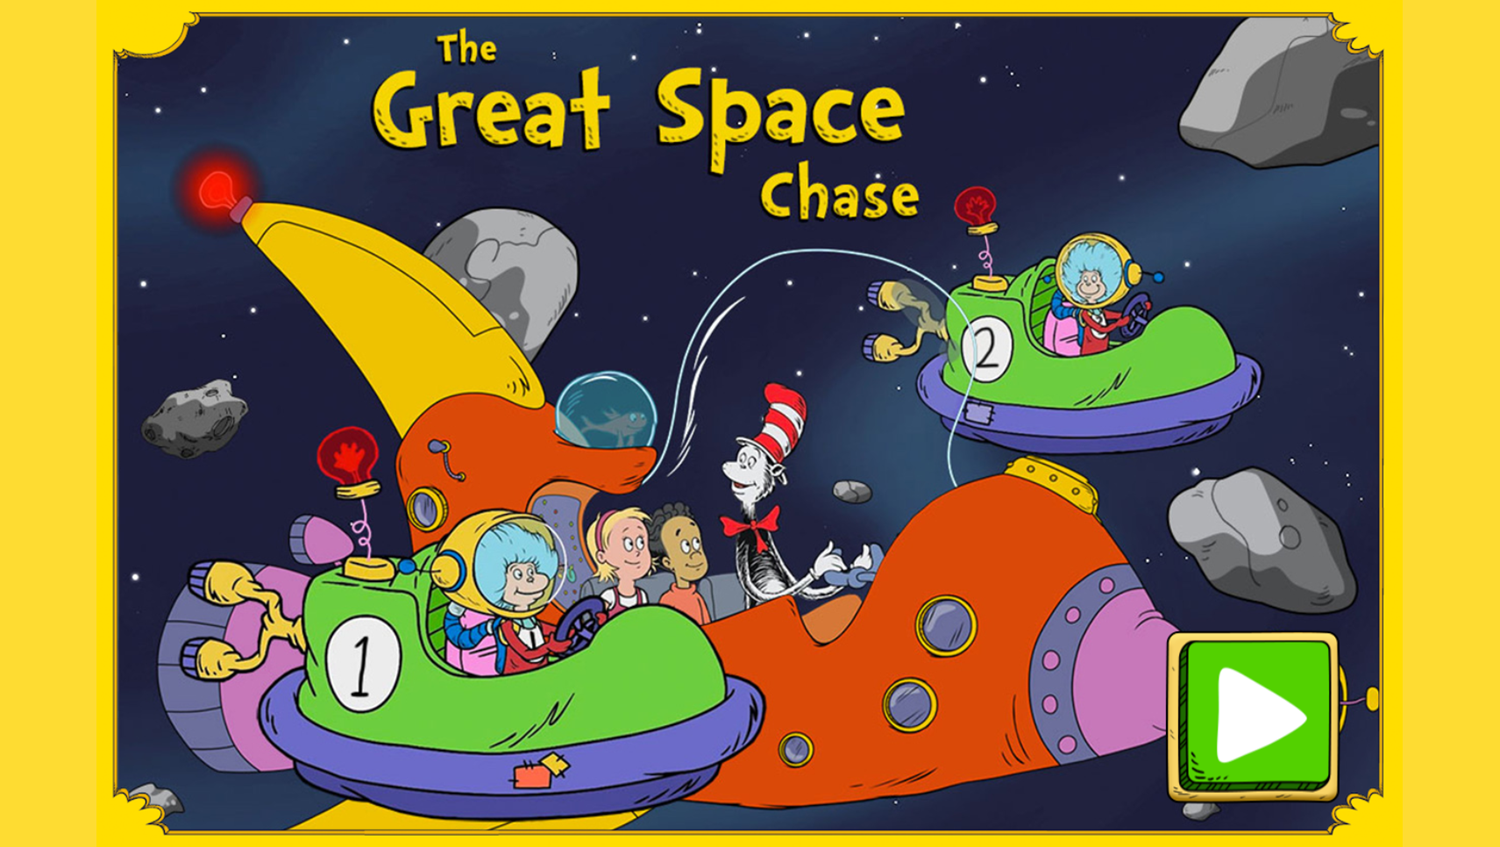 The Cat in the Hat The Great Space Chase Game Welcome Screen Screenshot.